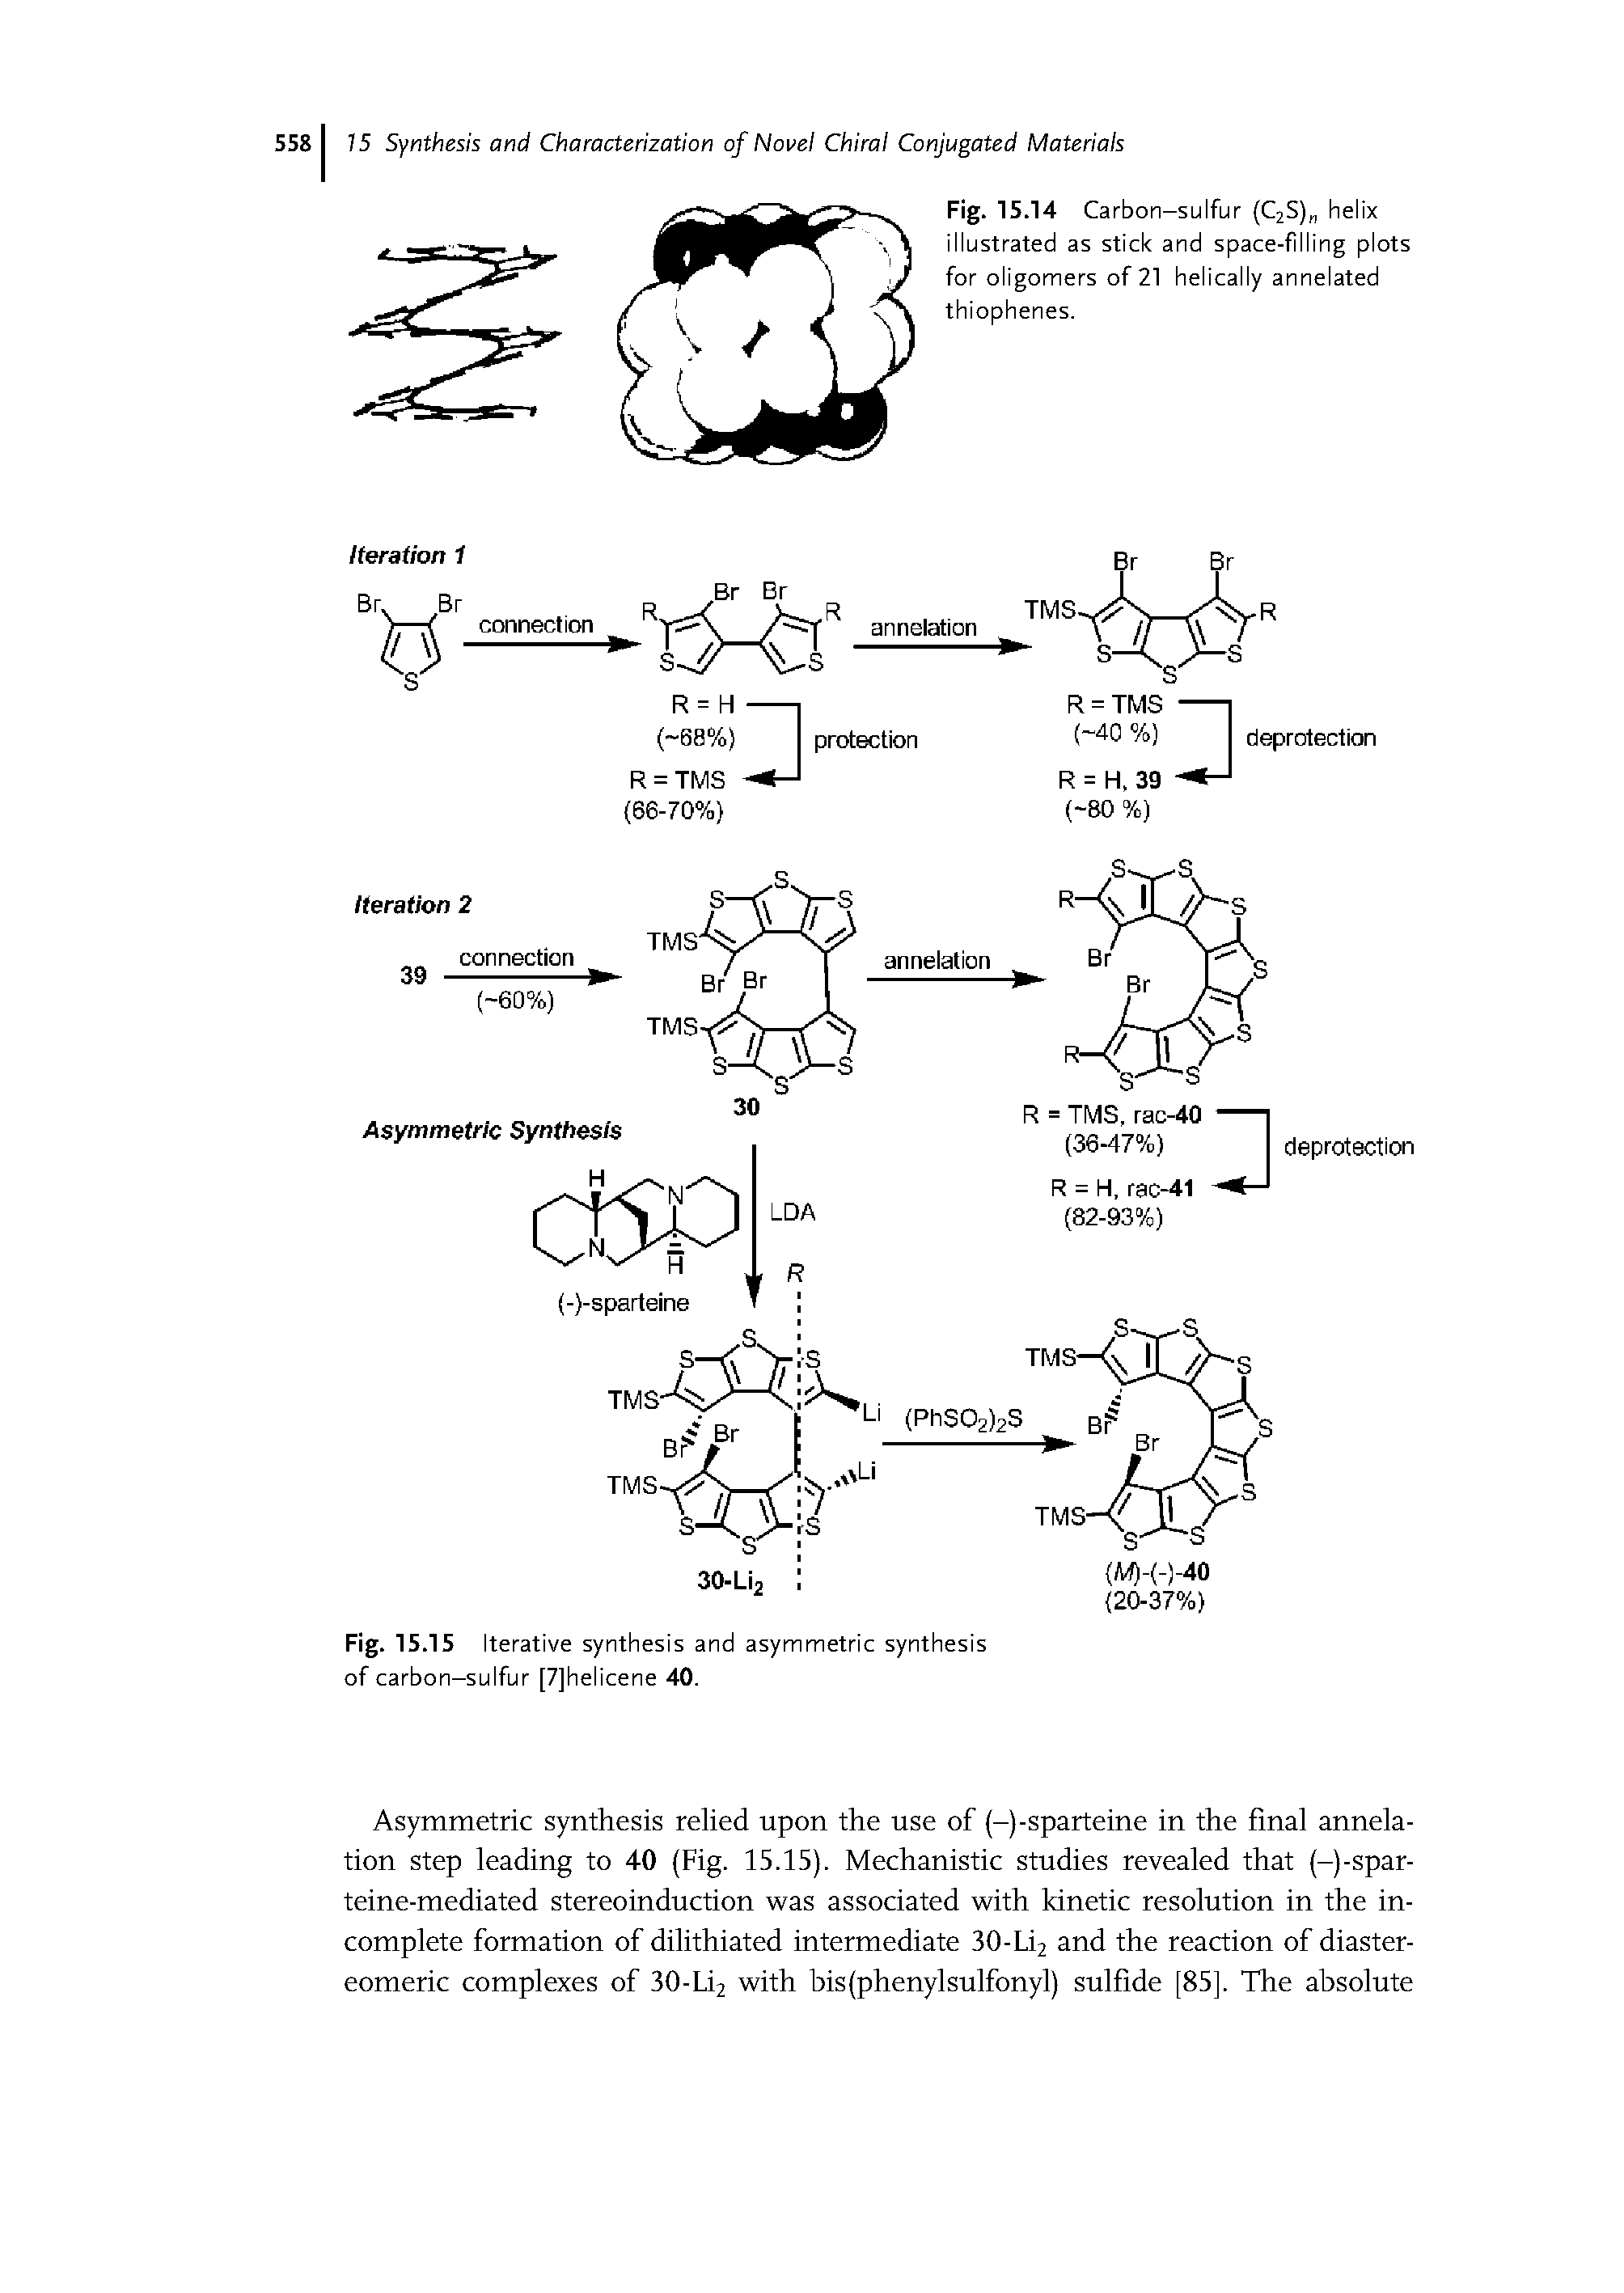 Fig. 15.15 Iterative synthesis and asymmetric synthesis of carbon-sulfur [7]helicene 40.